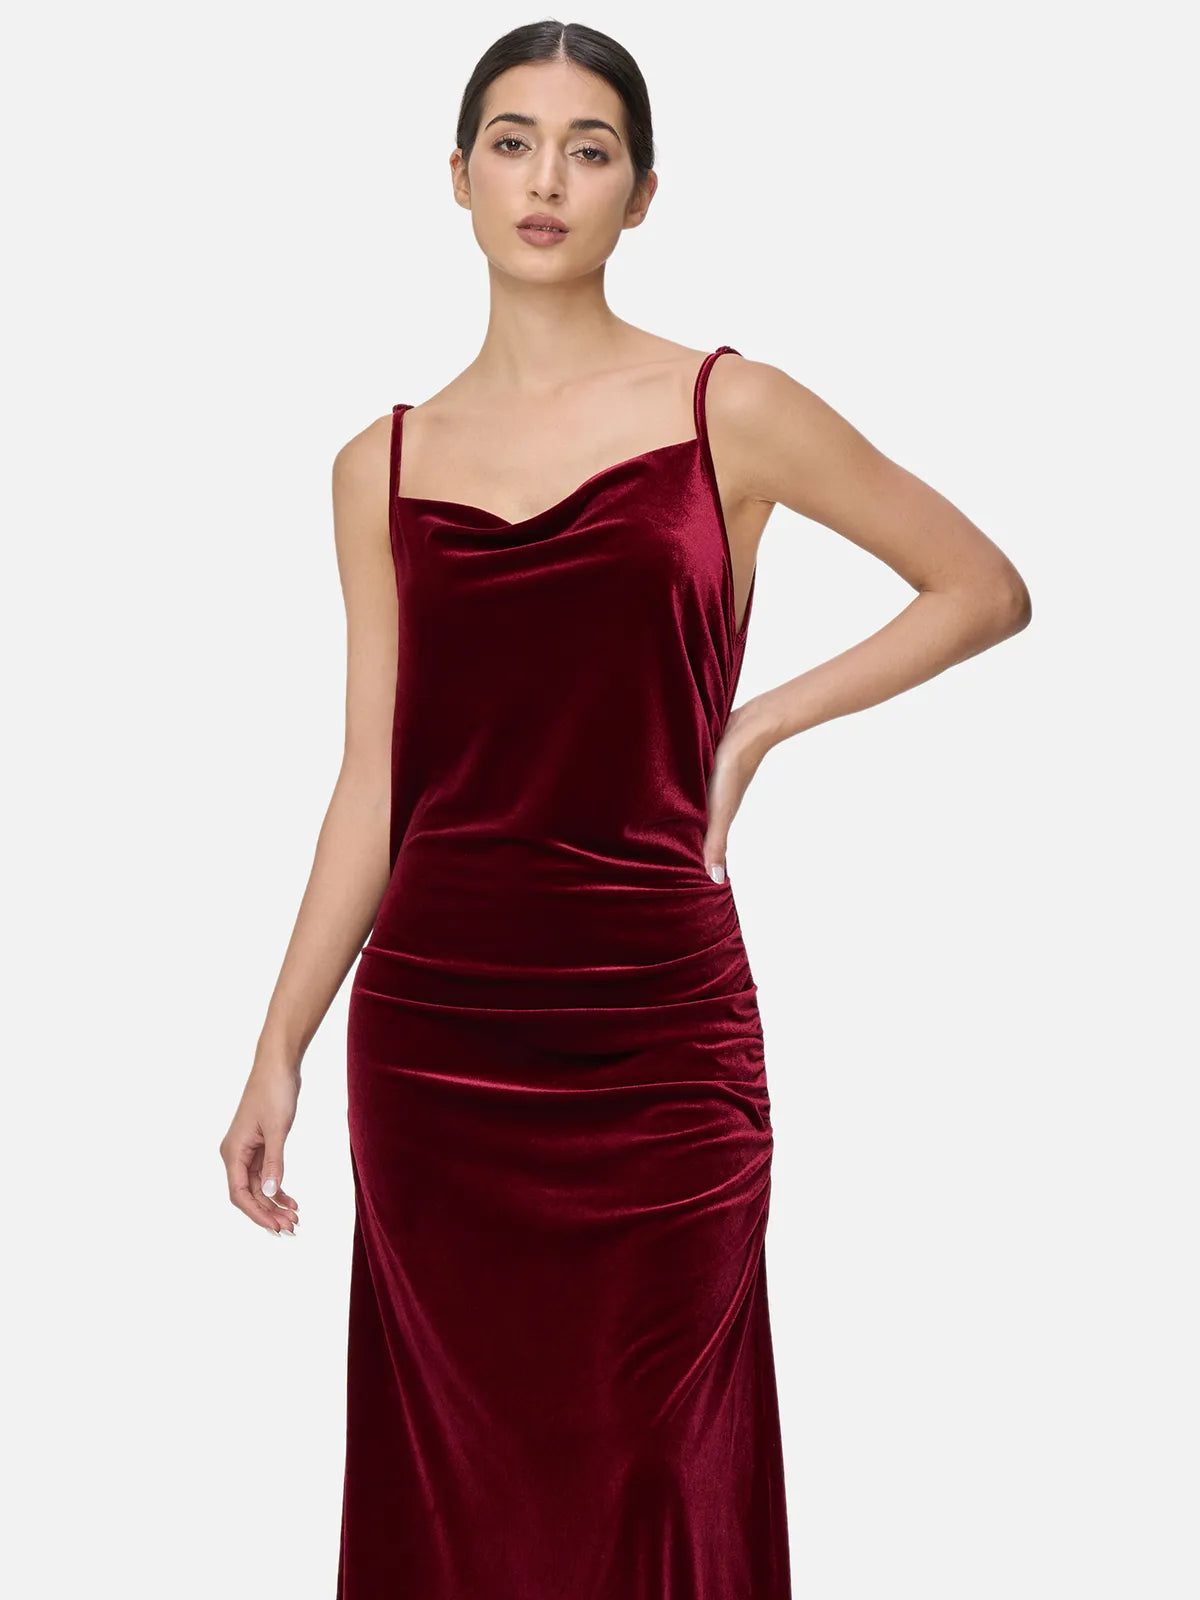 Fashionable women&#39;s clothing with a velvet spaghetti strap maxi dress featuring fluid layered effect design